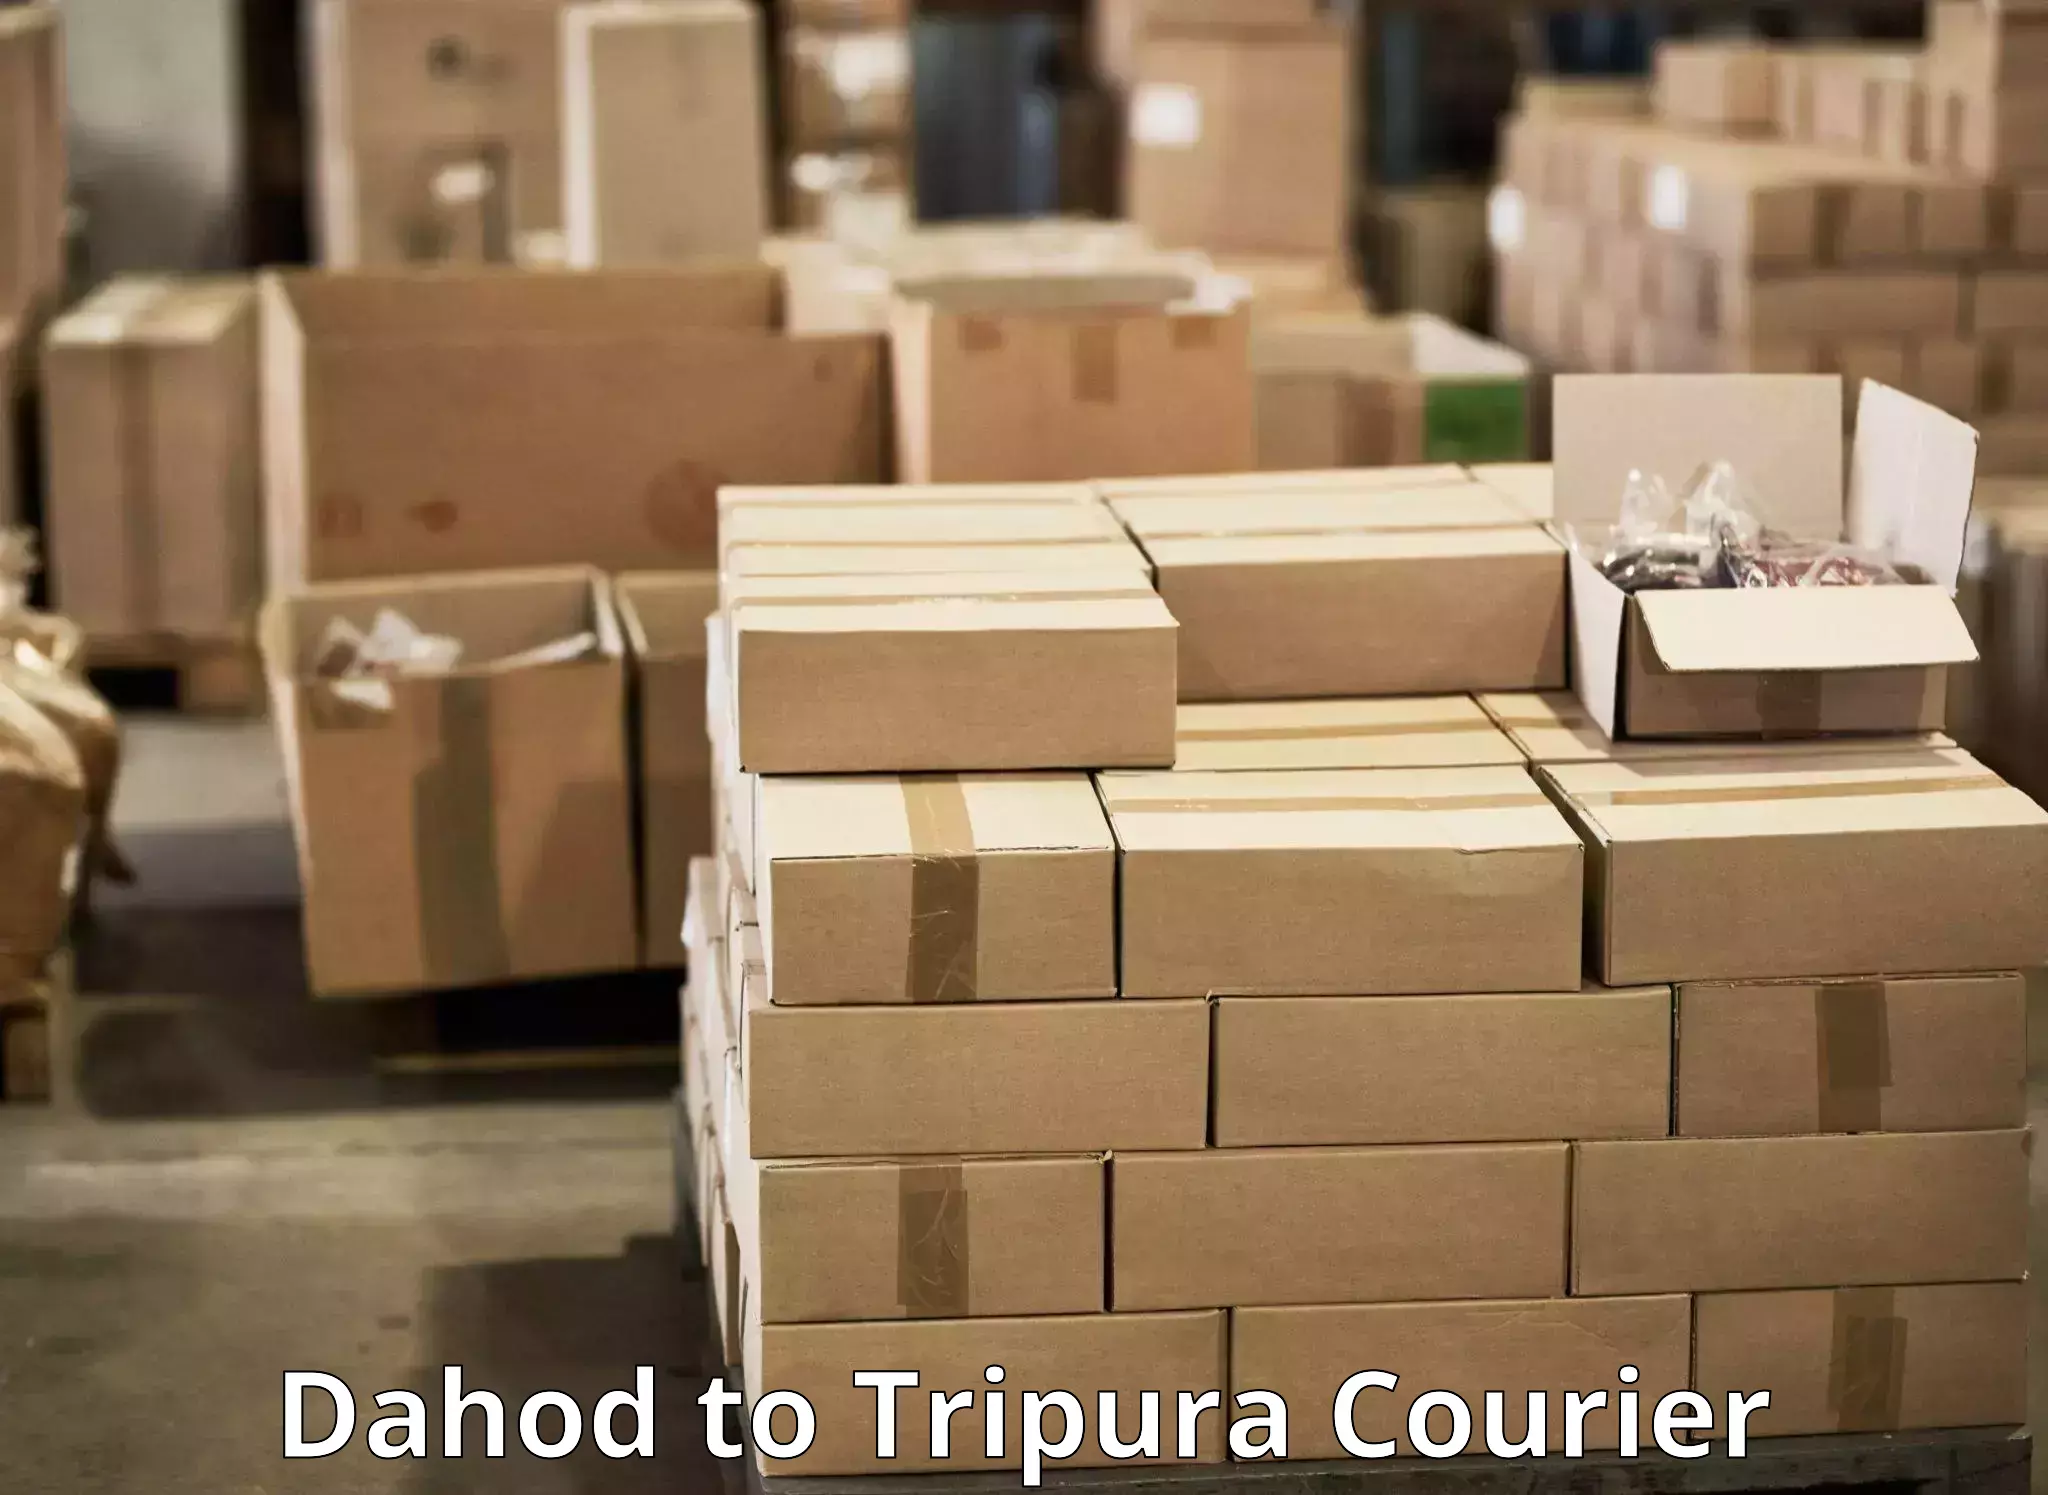 Overnight delivery services Dahod to Udaipur Tripura